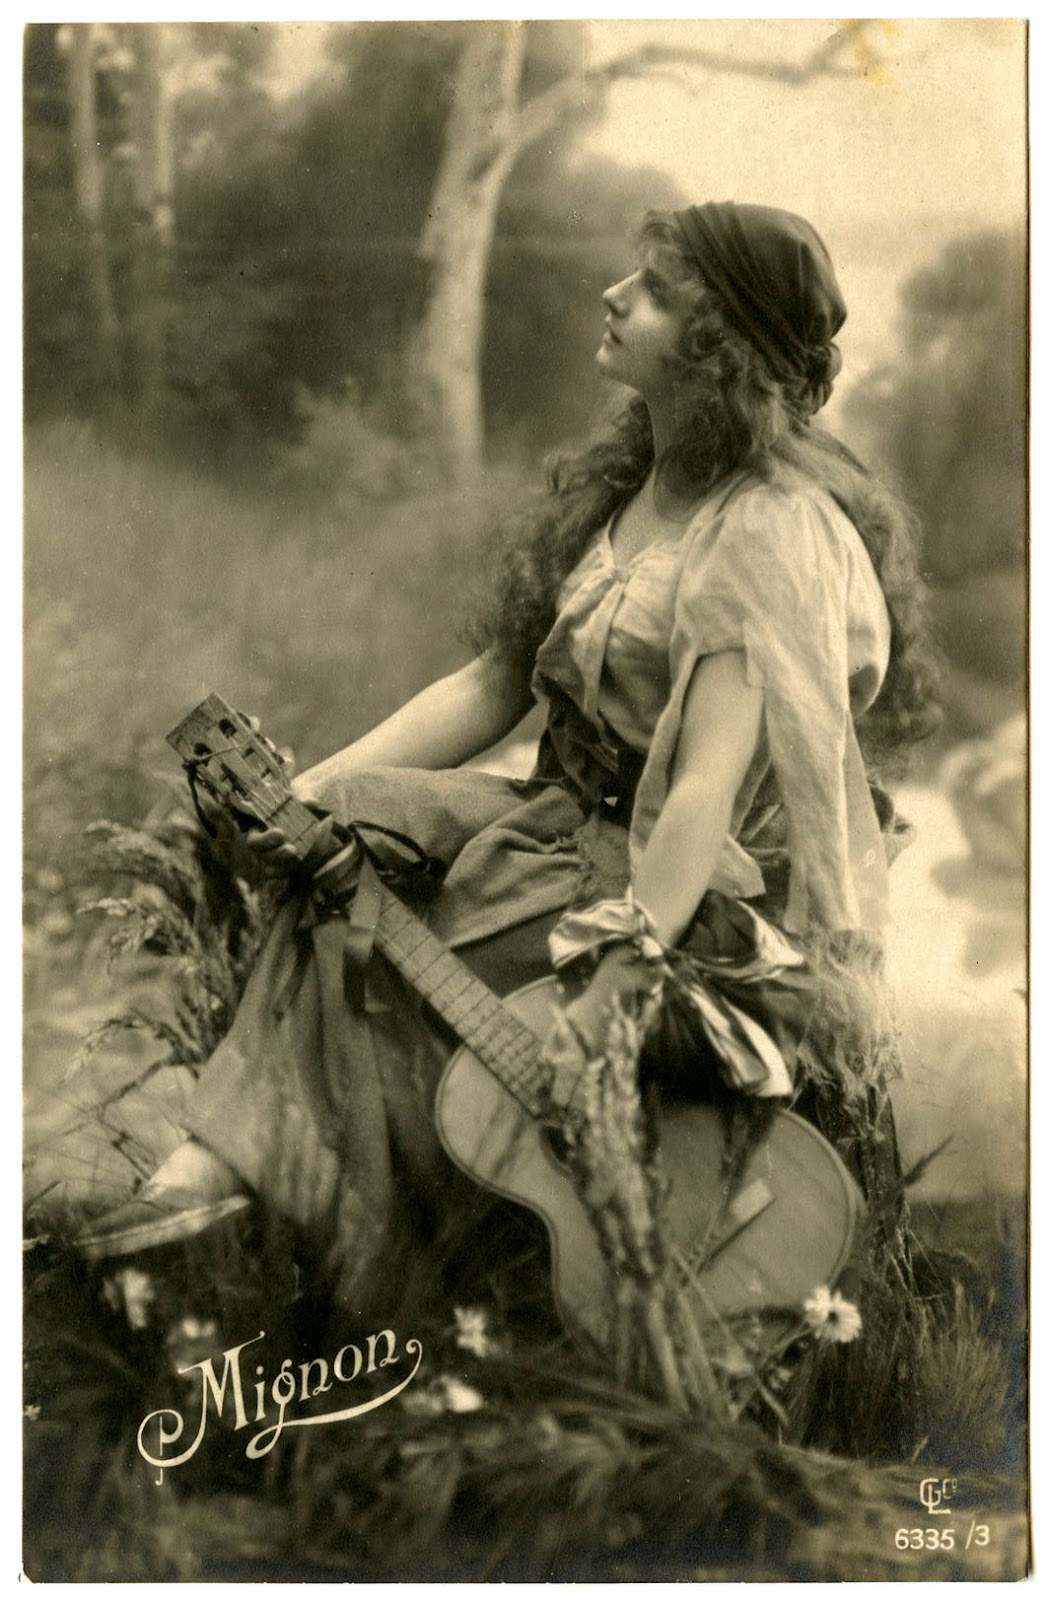 Gypsy Image with Guitar